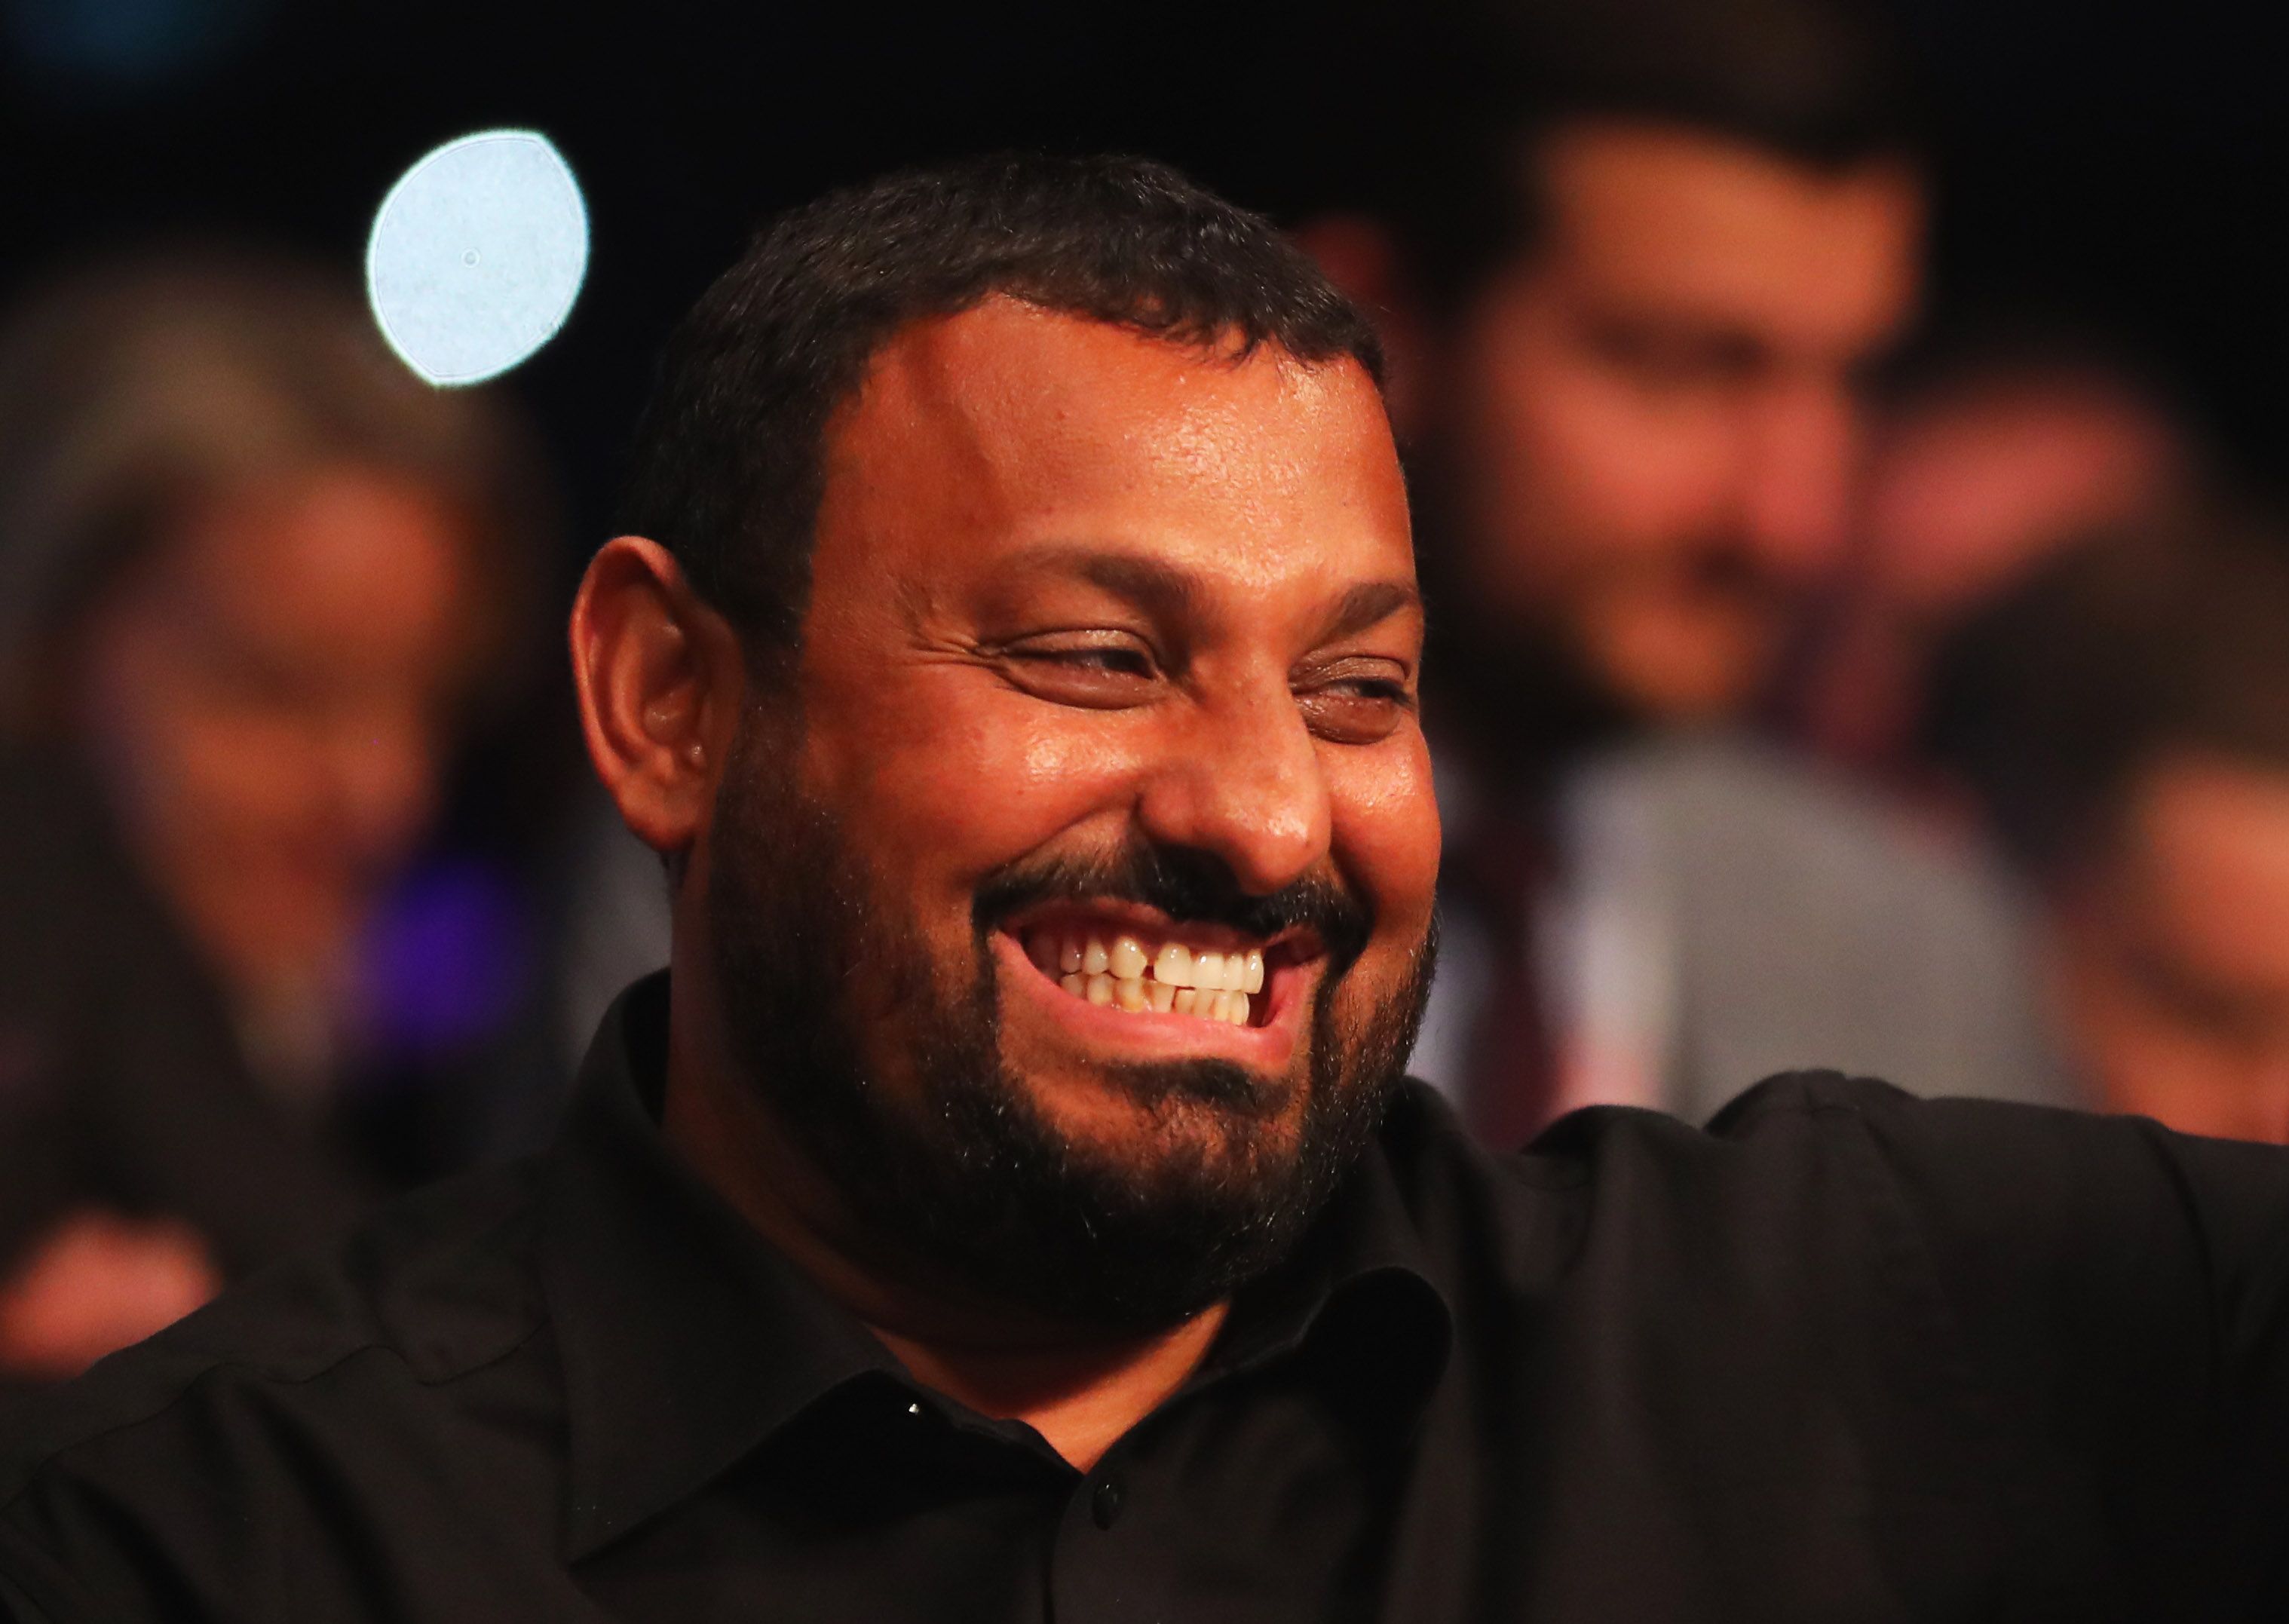 Prince Naseem at a Boxing event